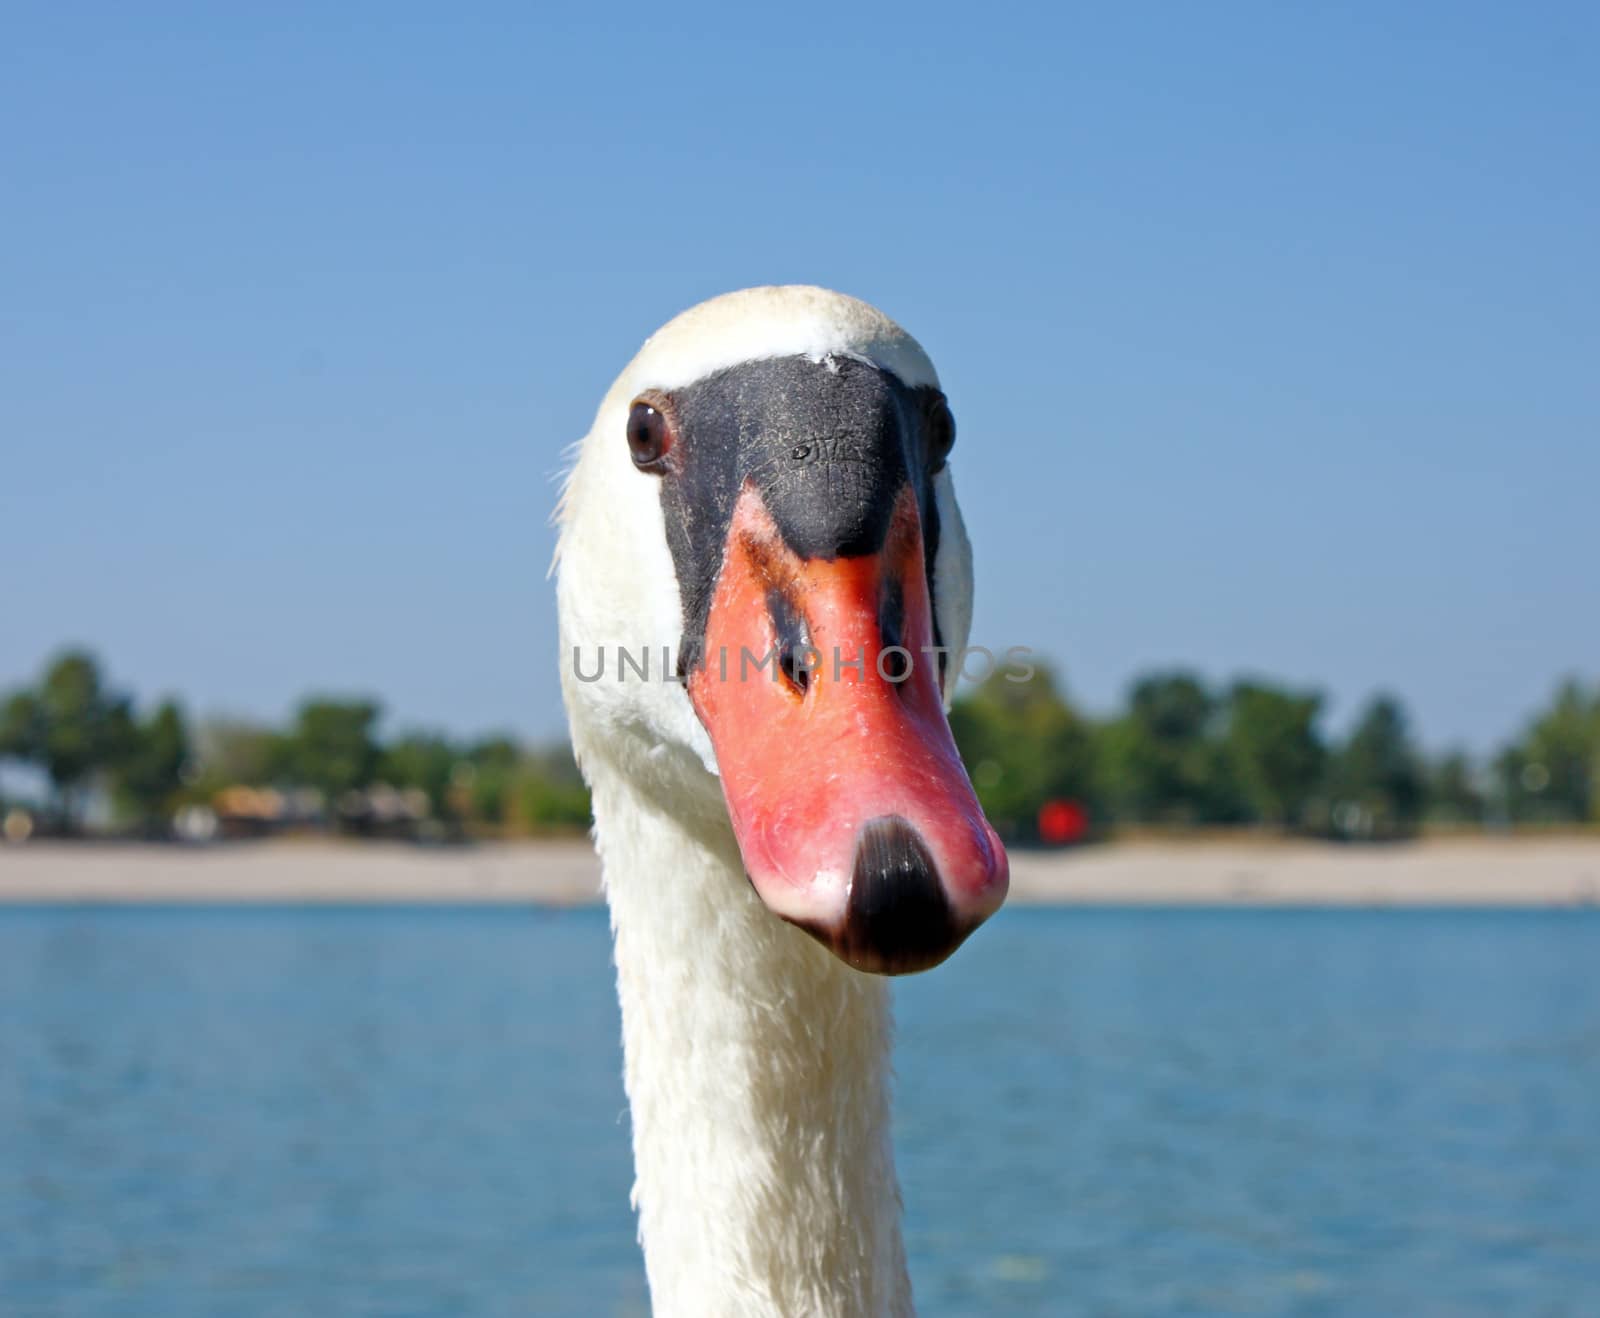 Portrait of a Swan, Lake in the Background